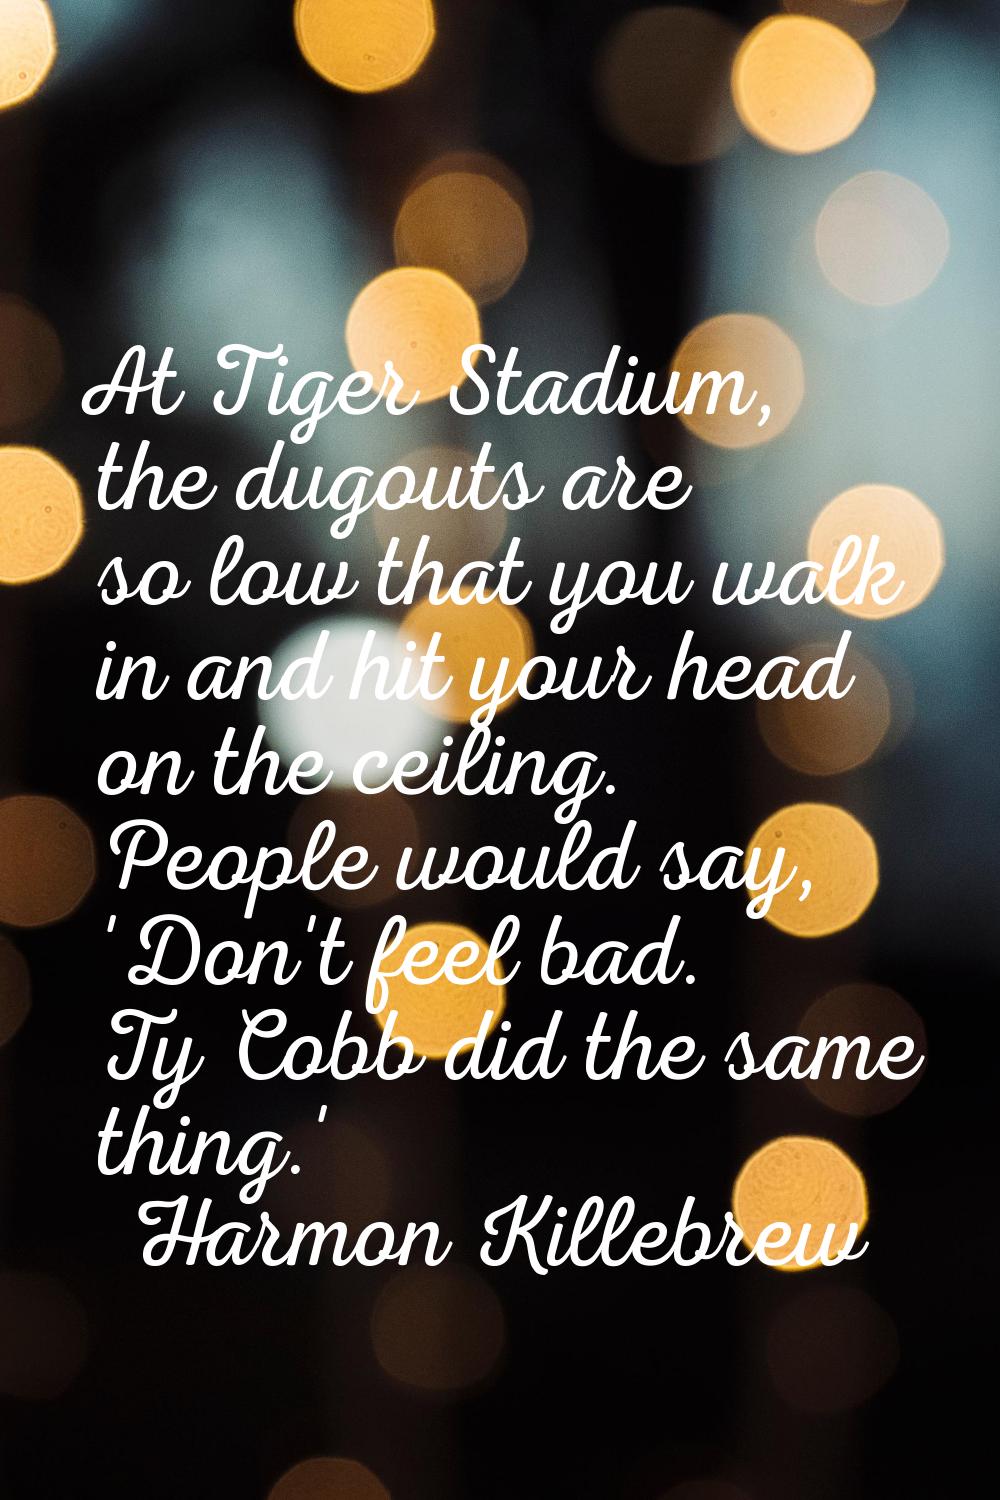 At Tiger Stadium, the dugouts are so low that you walk in and hit your head on the ceiling. People 